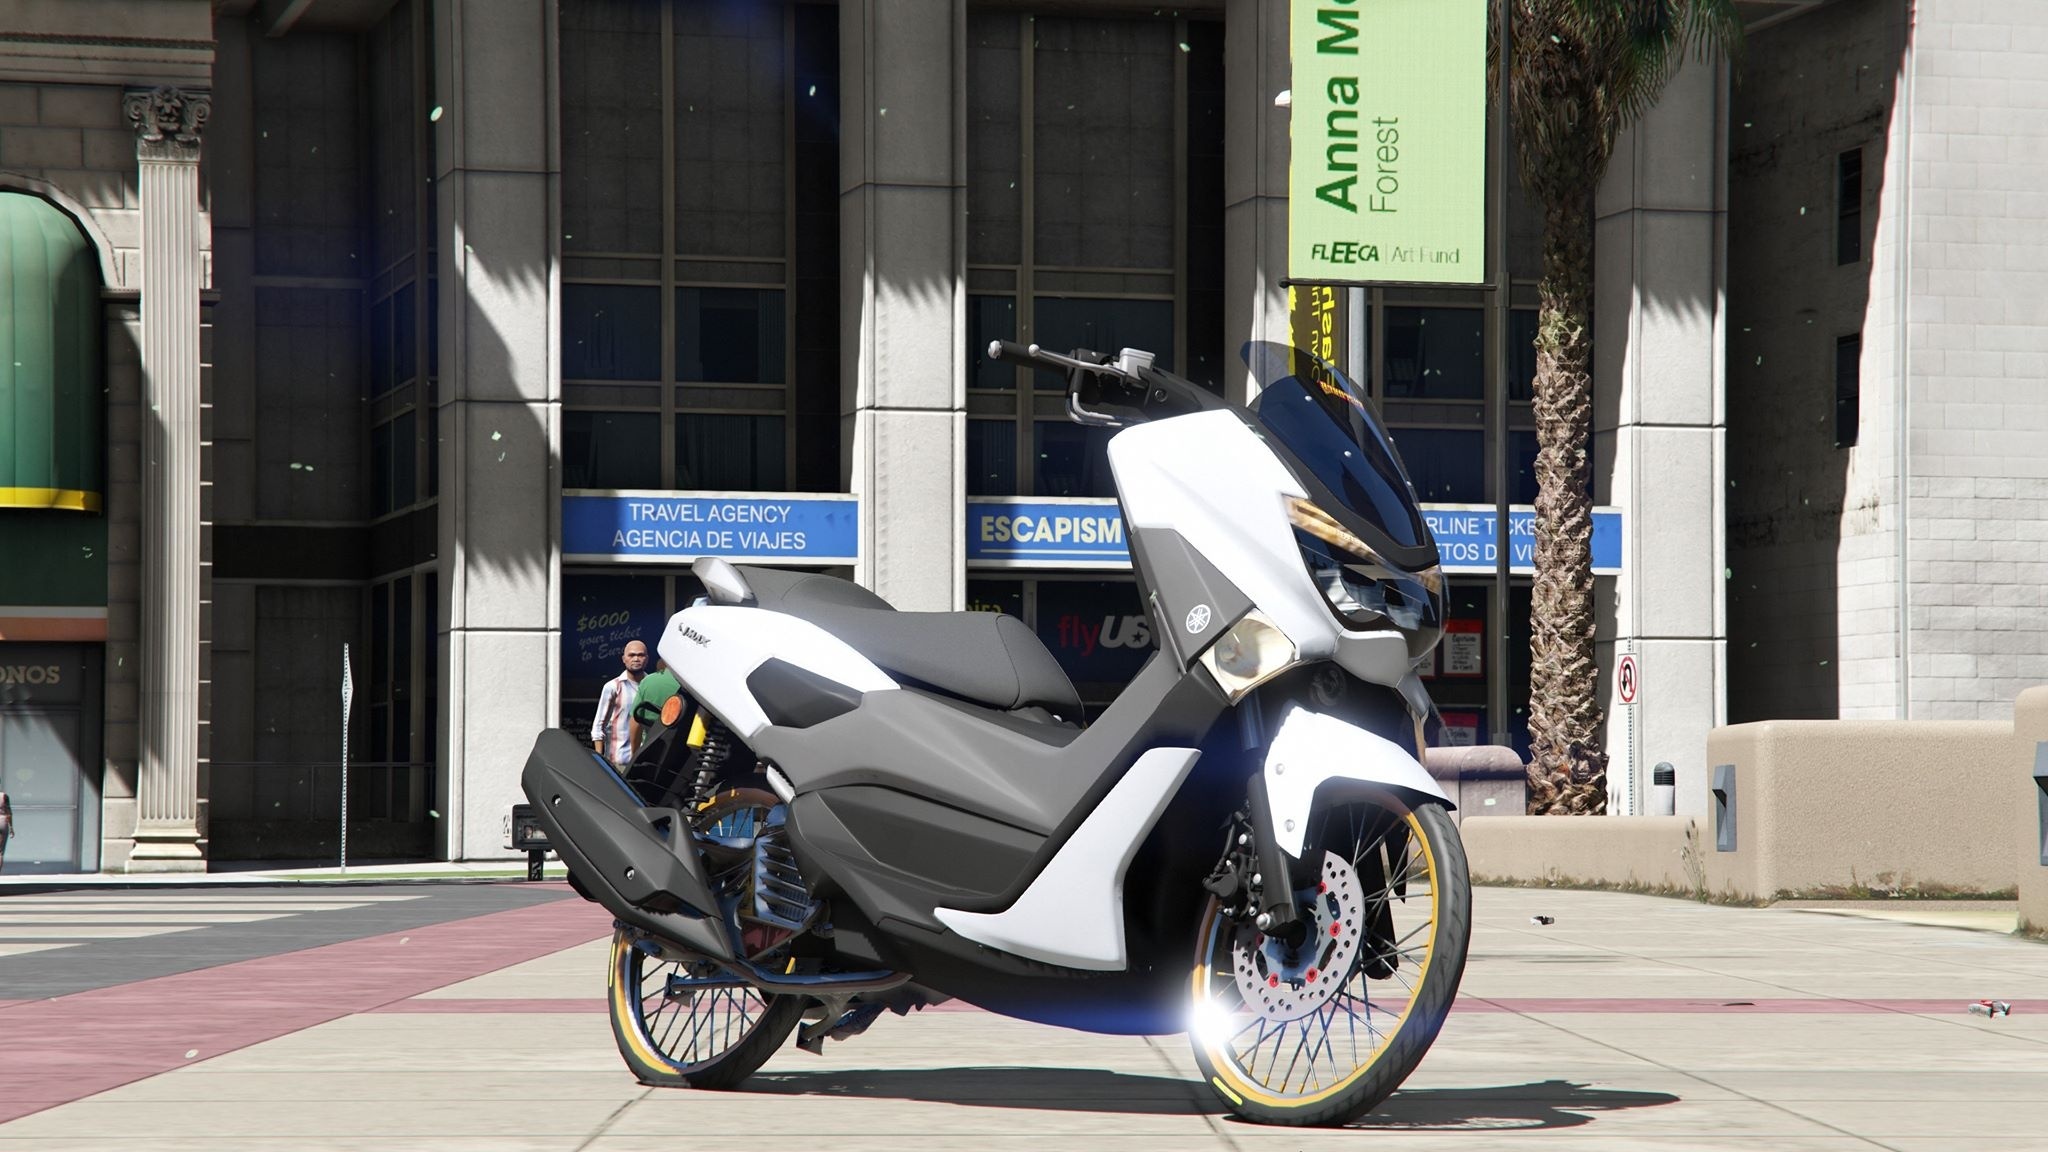 Yamaha NMax 150, GTA 5 mod, Add-on feature, Exciting gameplay, 2050x1160 HD Desktop